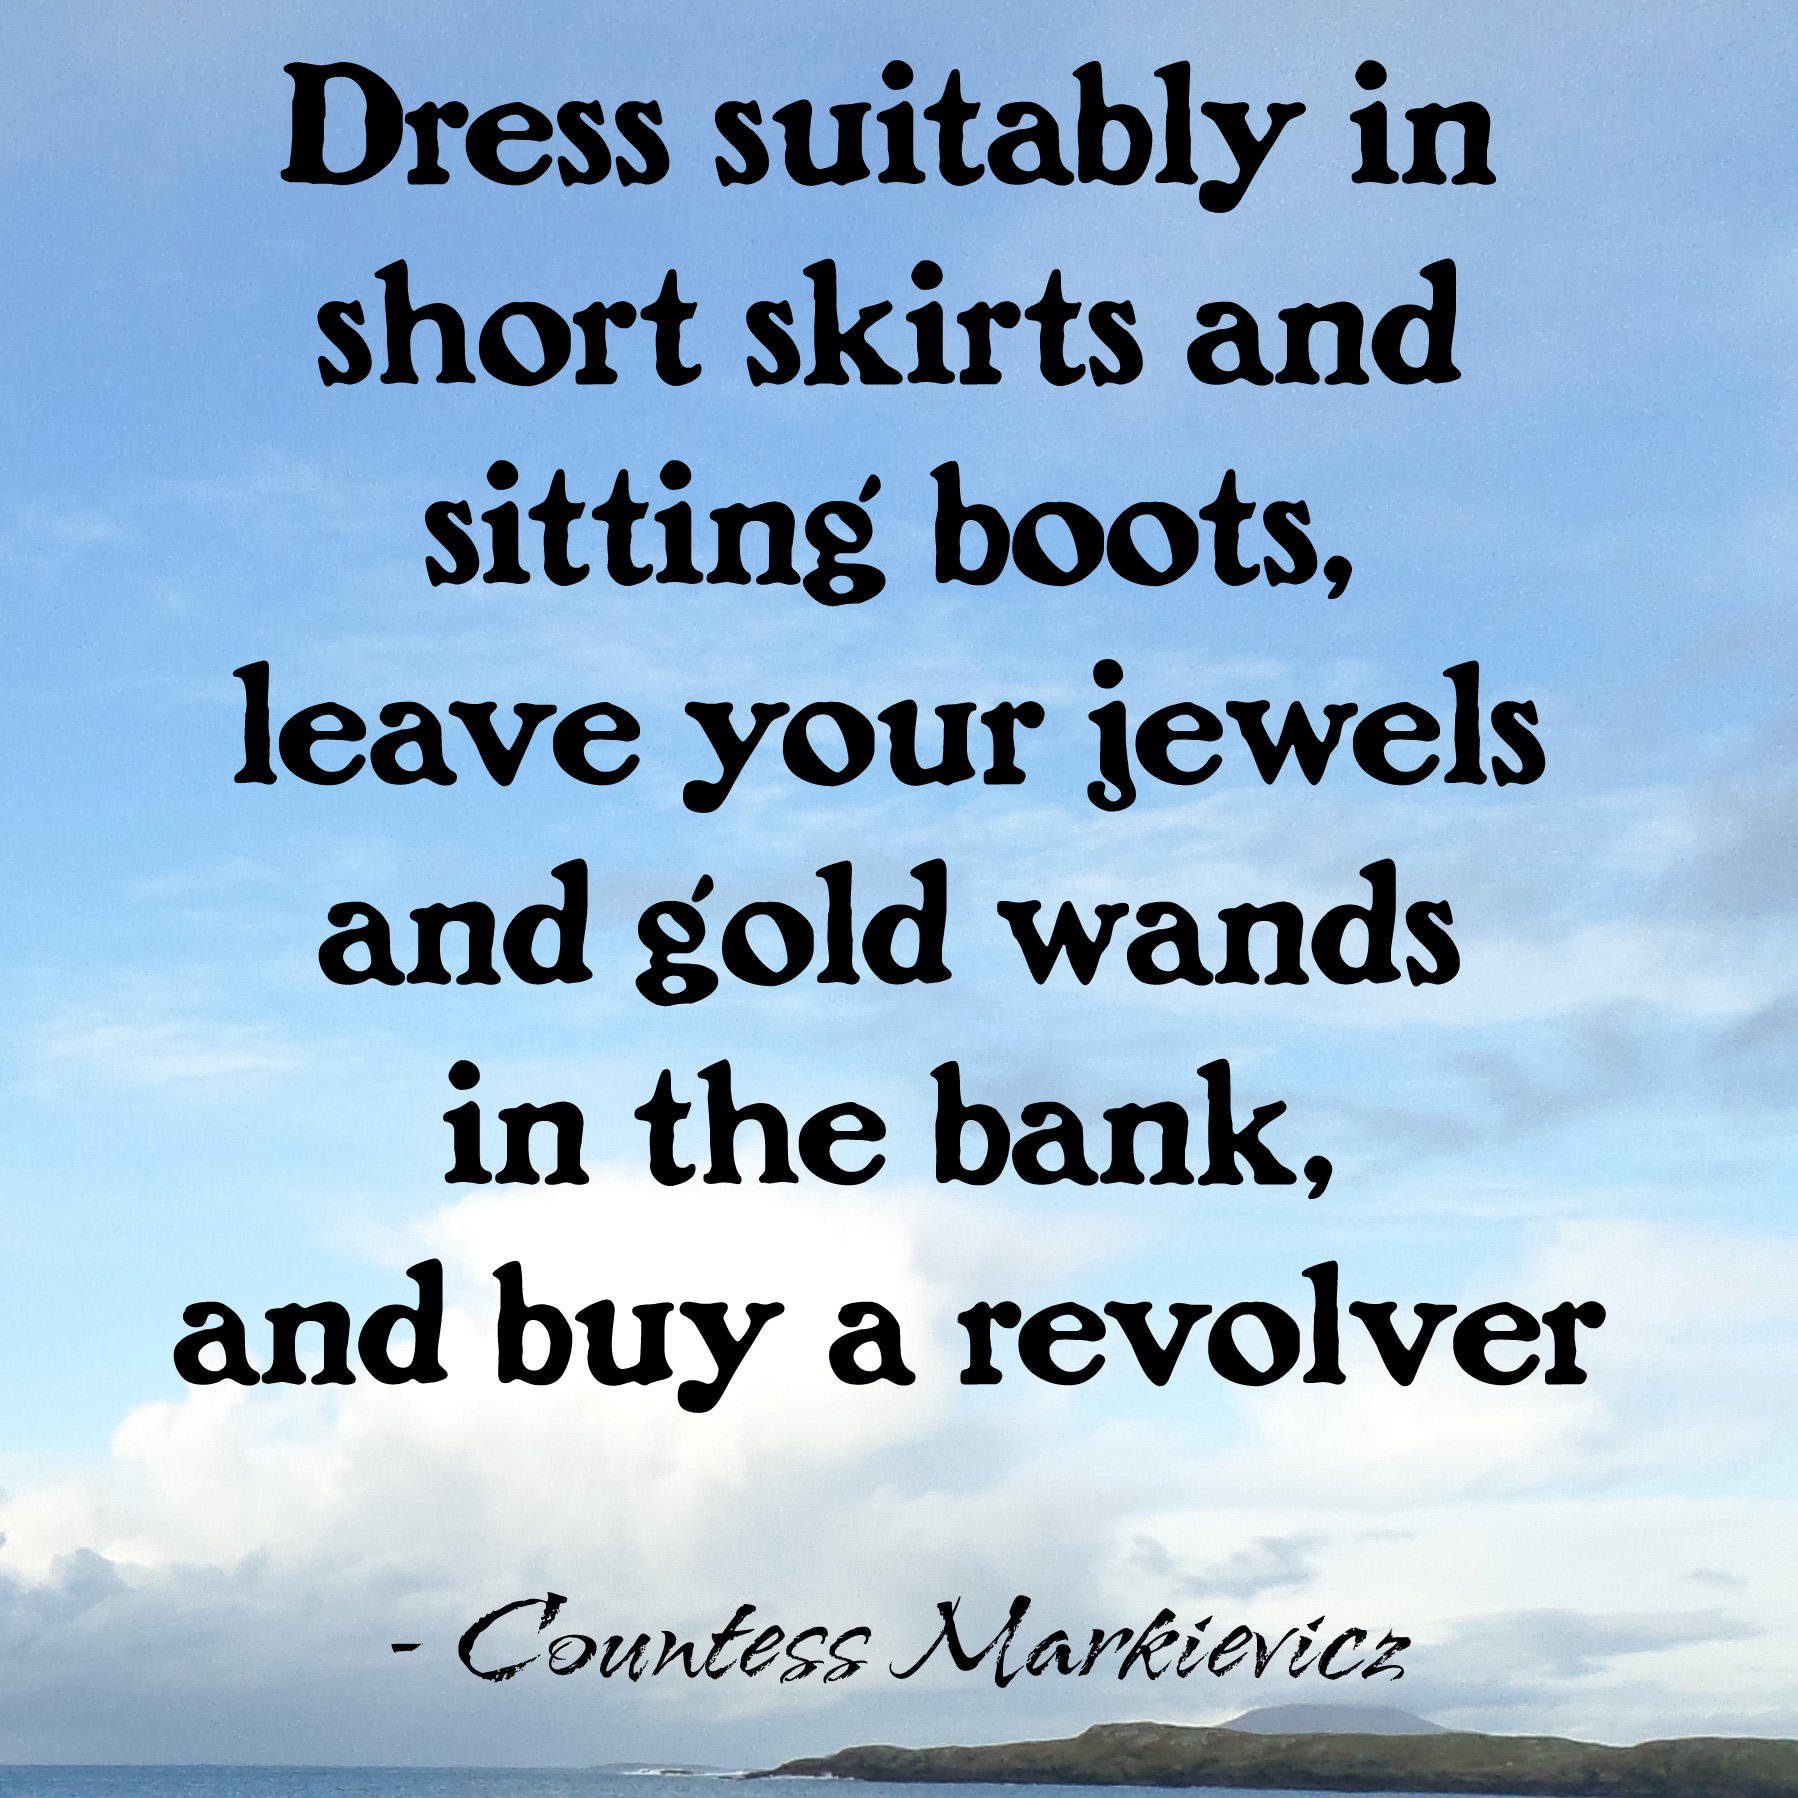 Dress suitably in short skirts and sitting boots, leave your jewels and gold wands in the bank, and buy a revolver